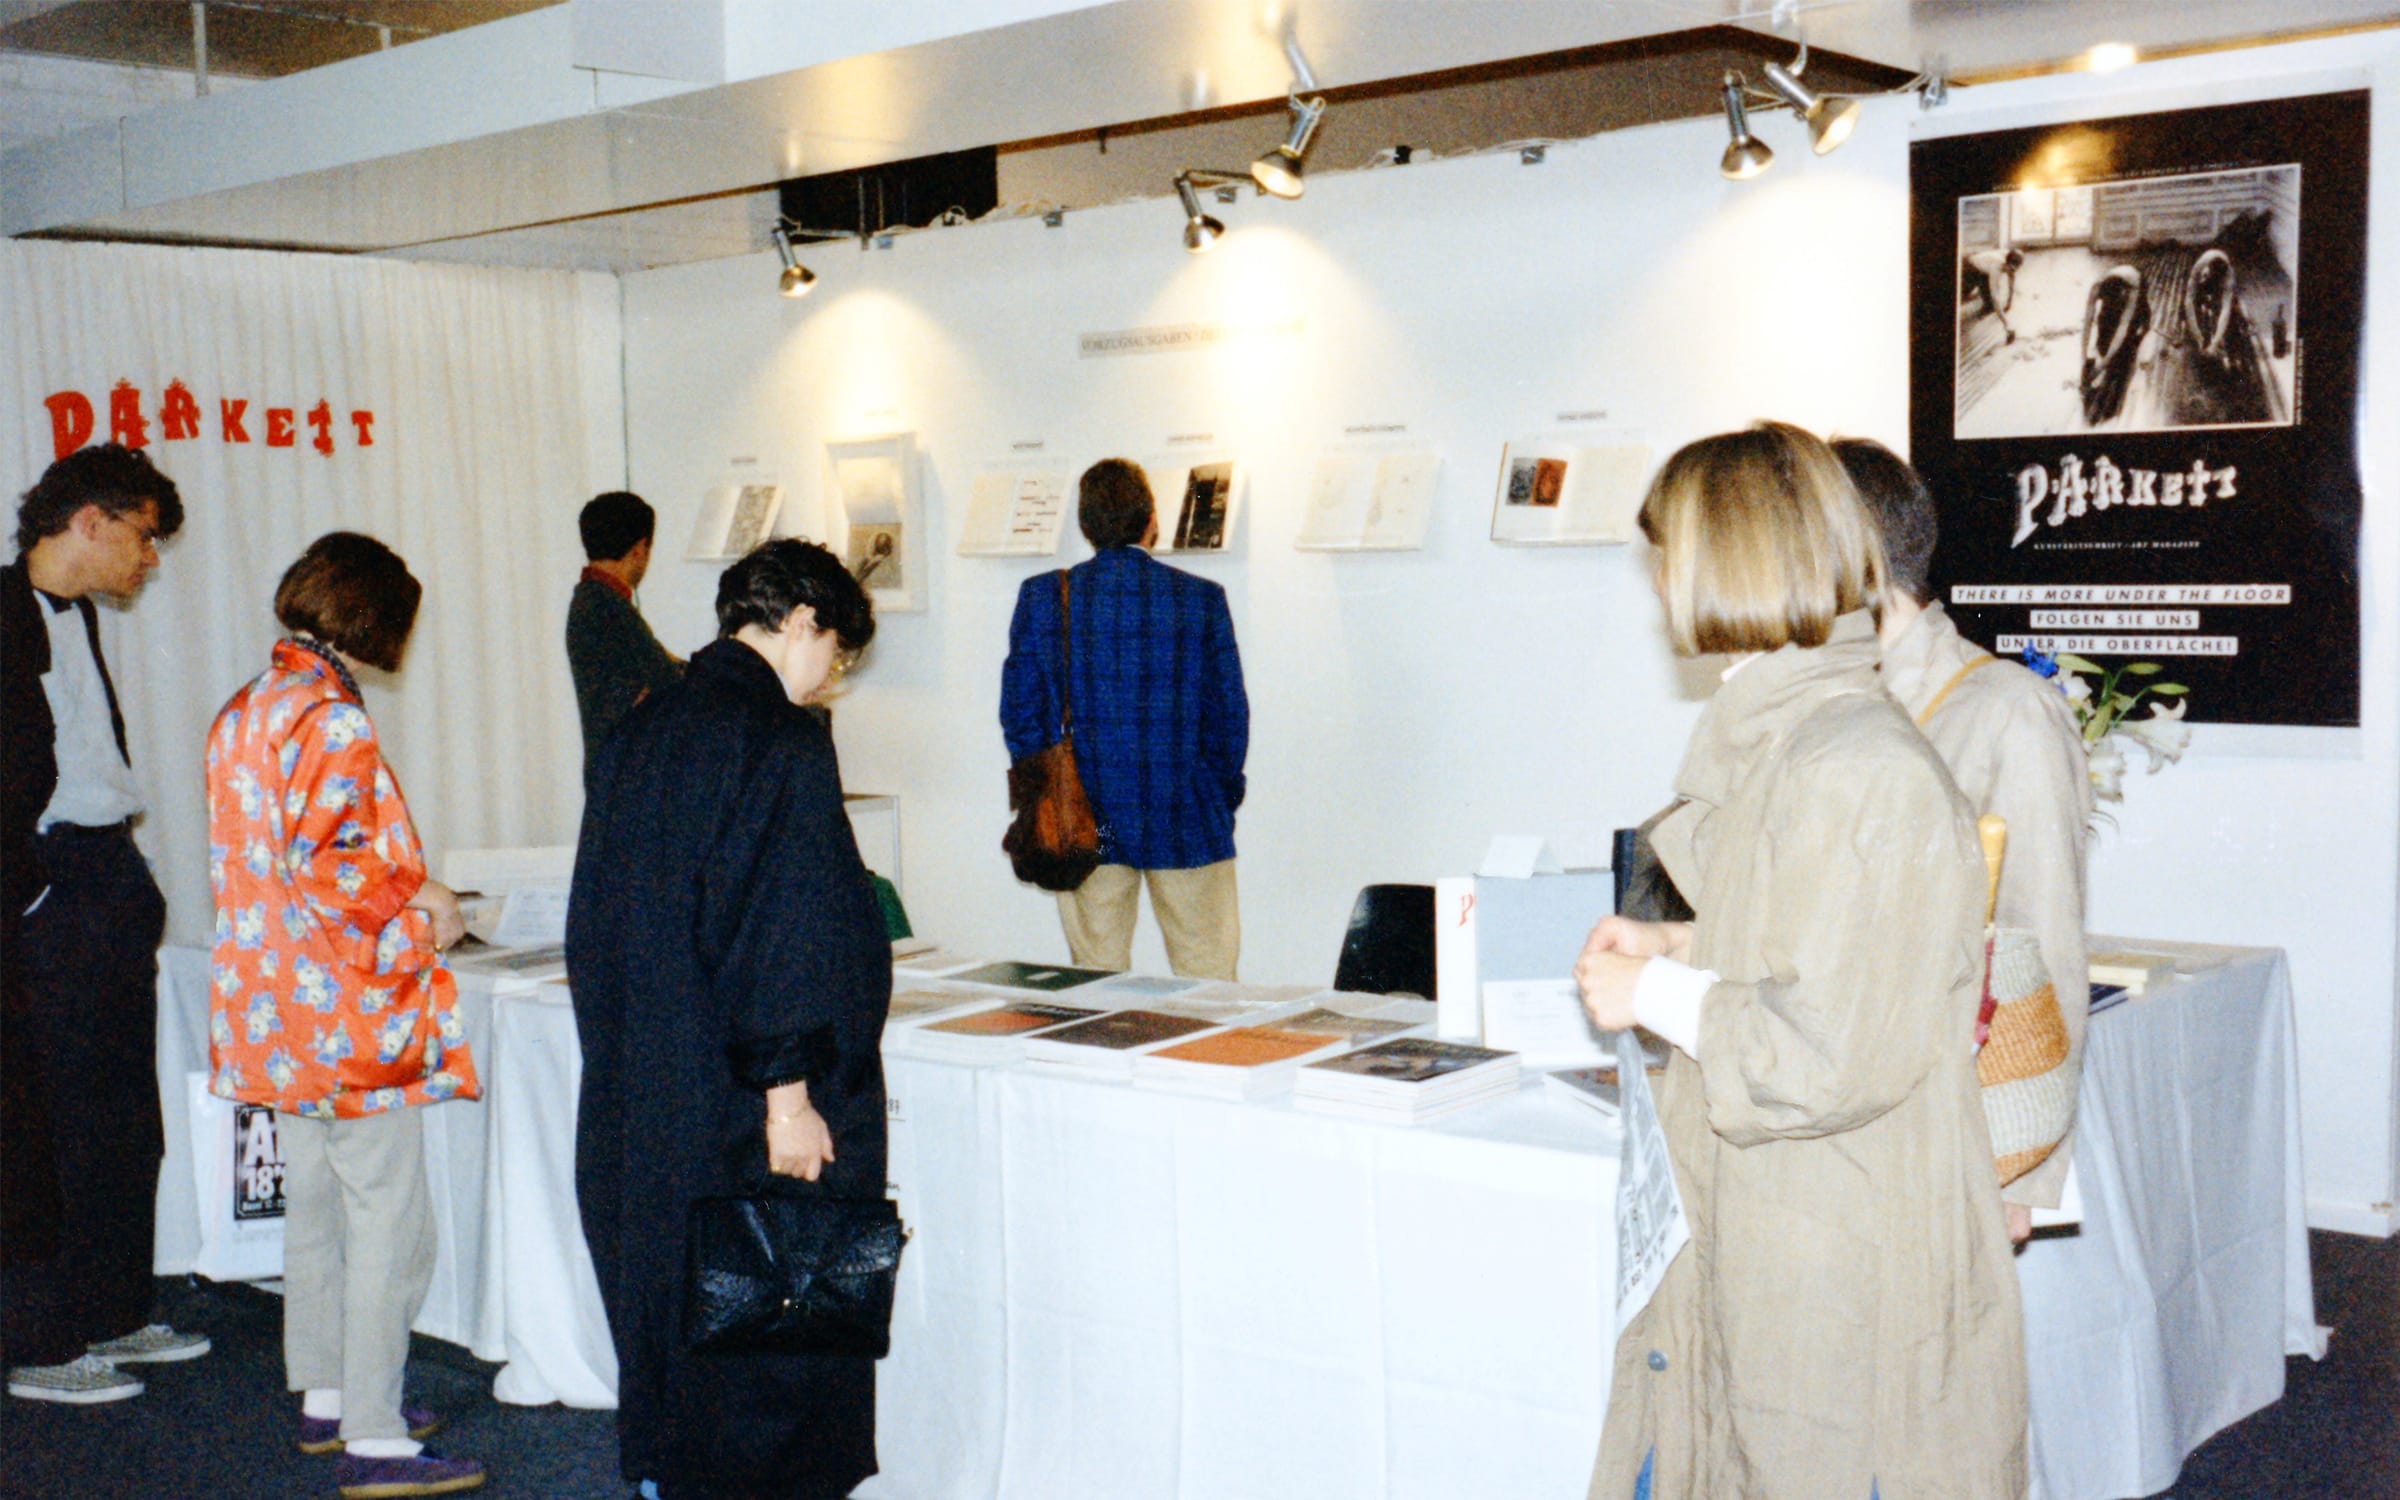 The Parkett booth, Art Basel, Basel, 1987. Courtesy of Bice Curiger.